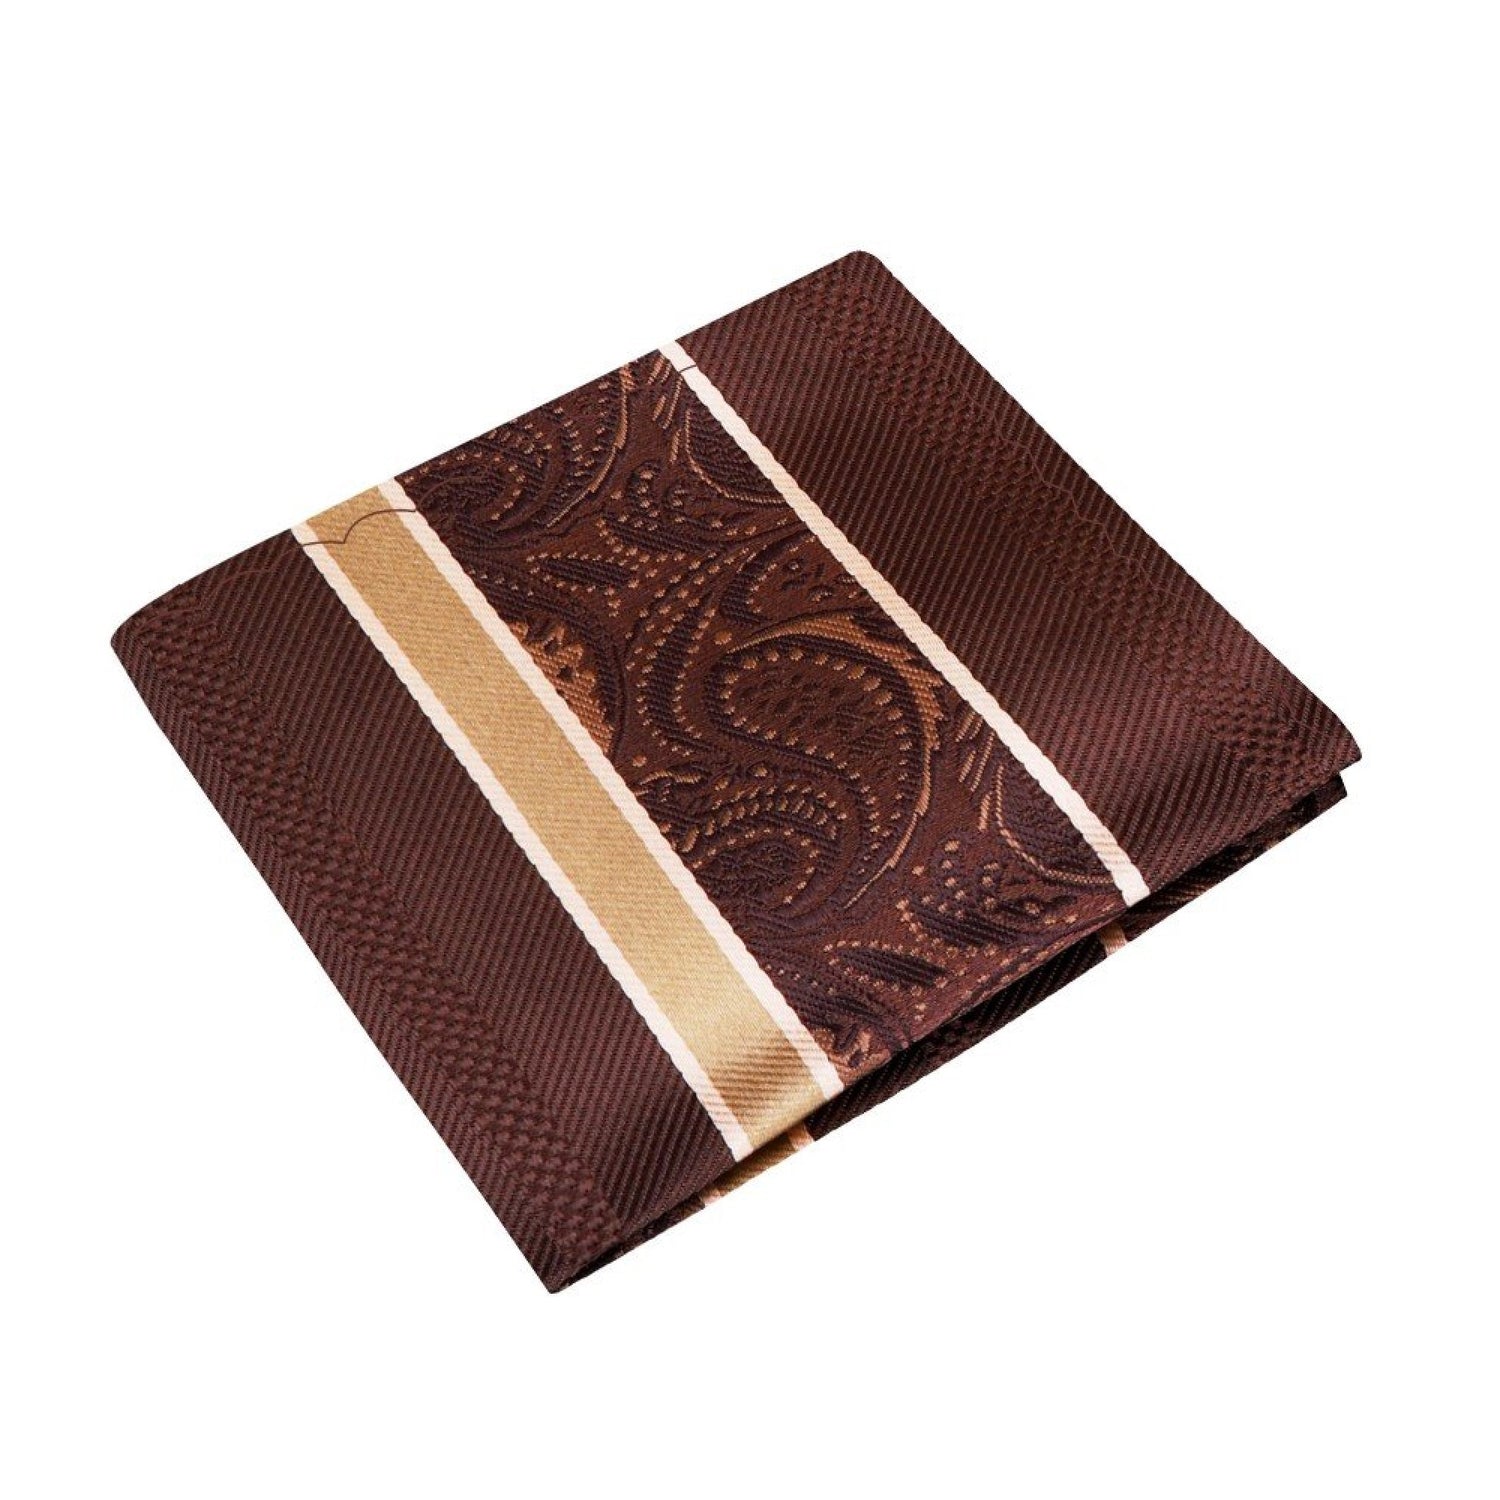 A Brown, Gold Paisley Pattern Silk Pocket Square